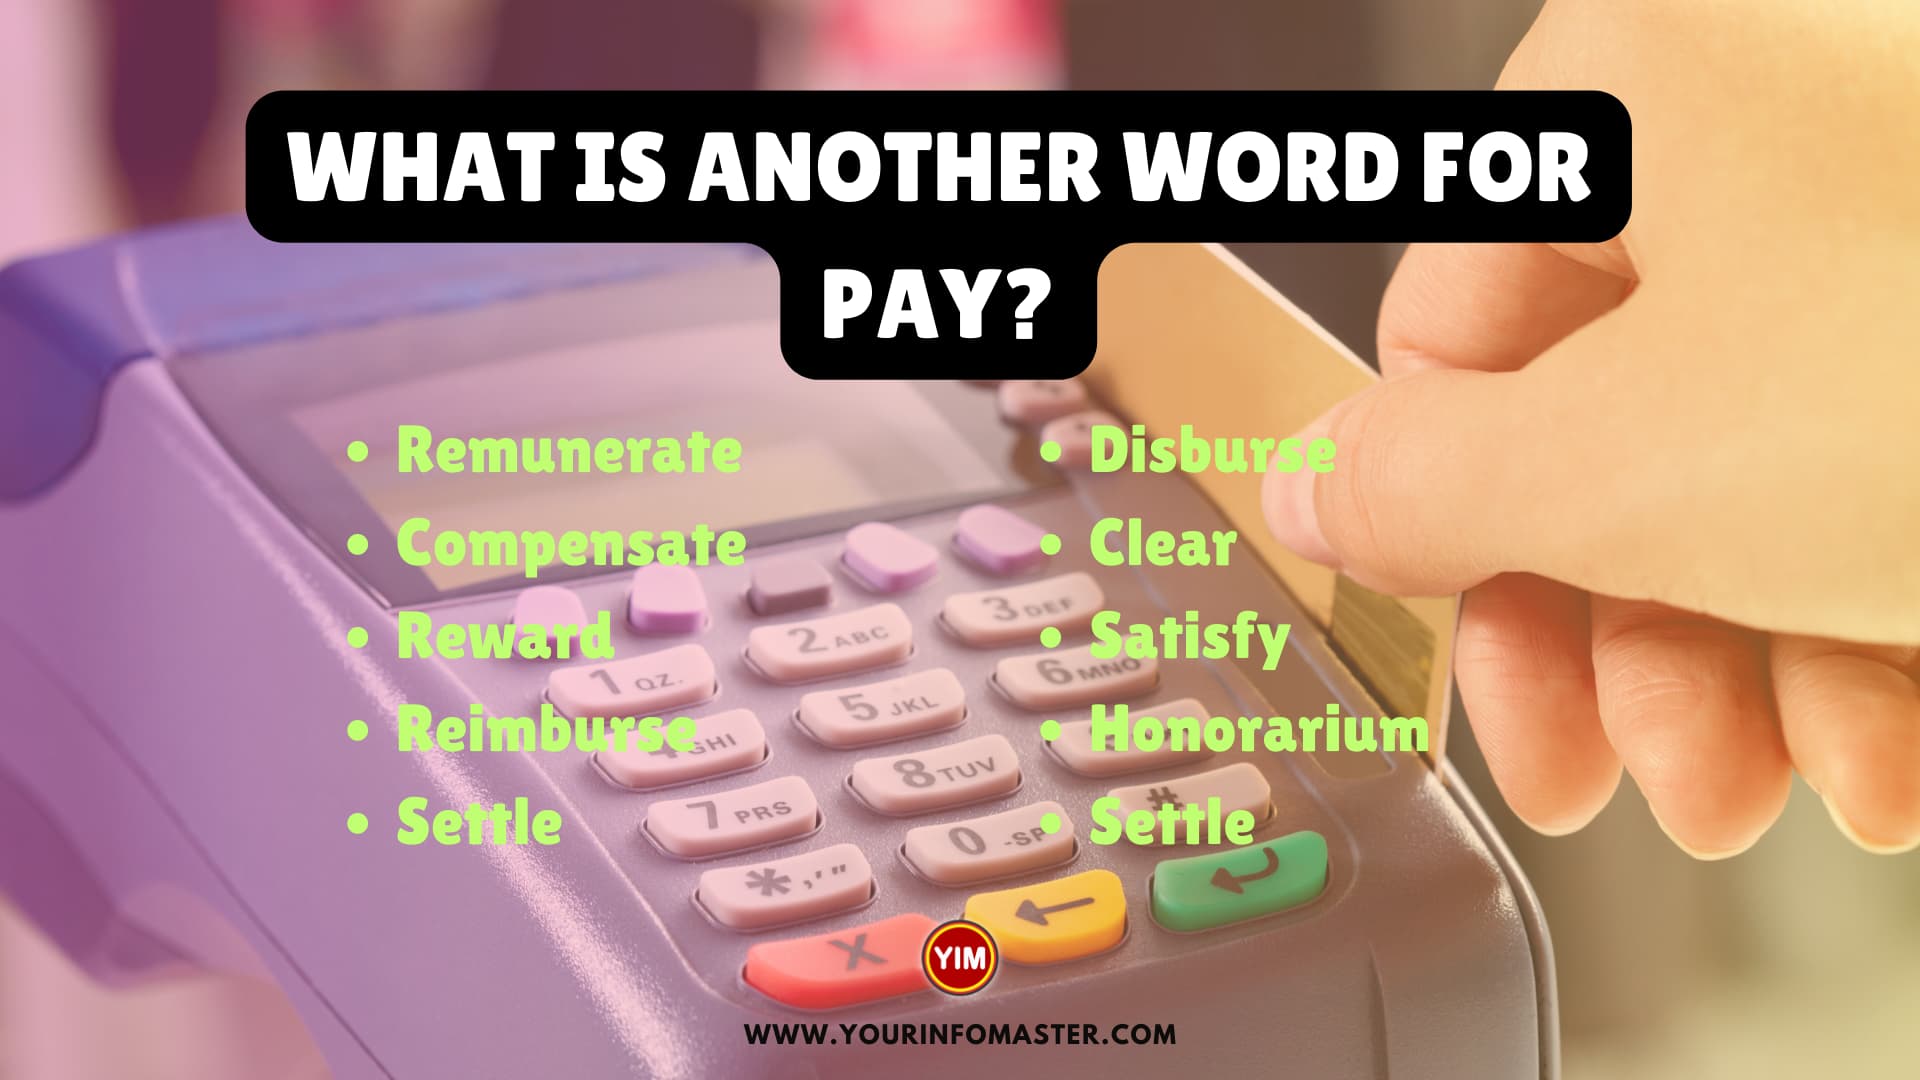 What is another word for Pay